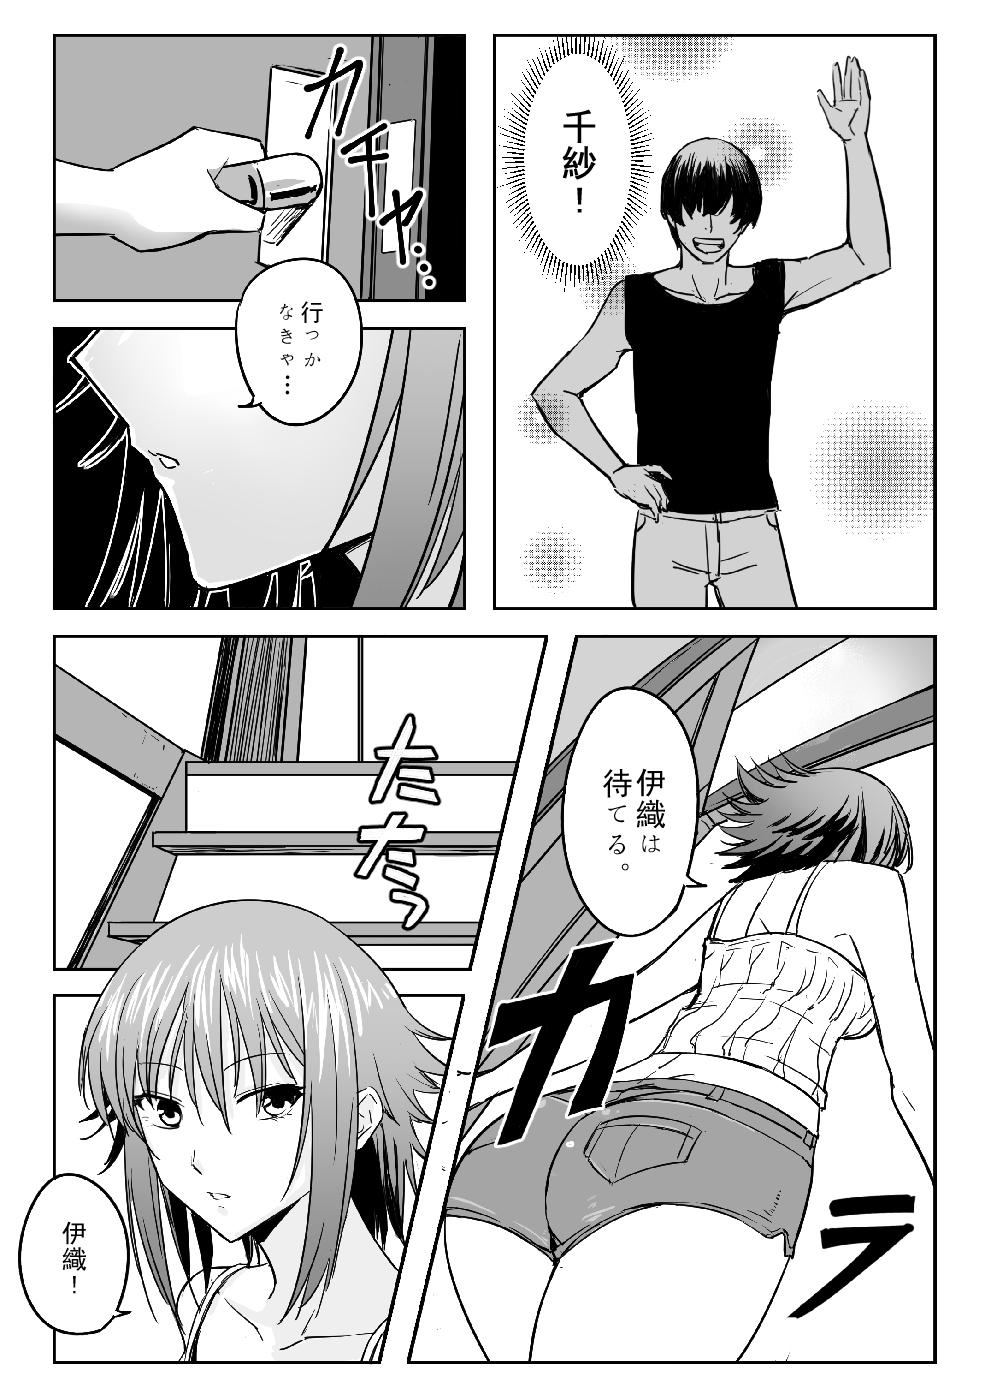 Blond Chika-chan is a goodbye! - Grand blue Stepsister - Page 5